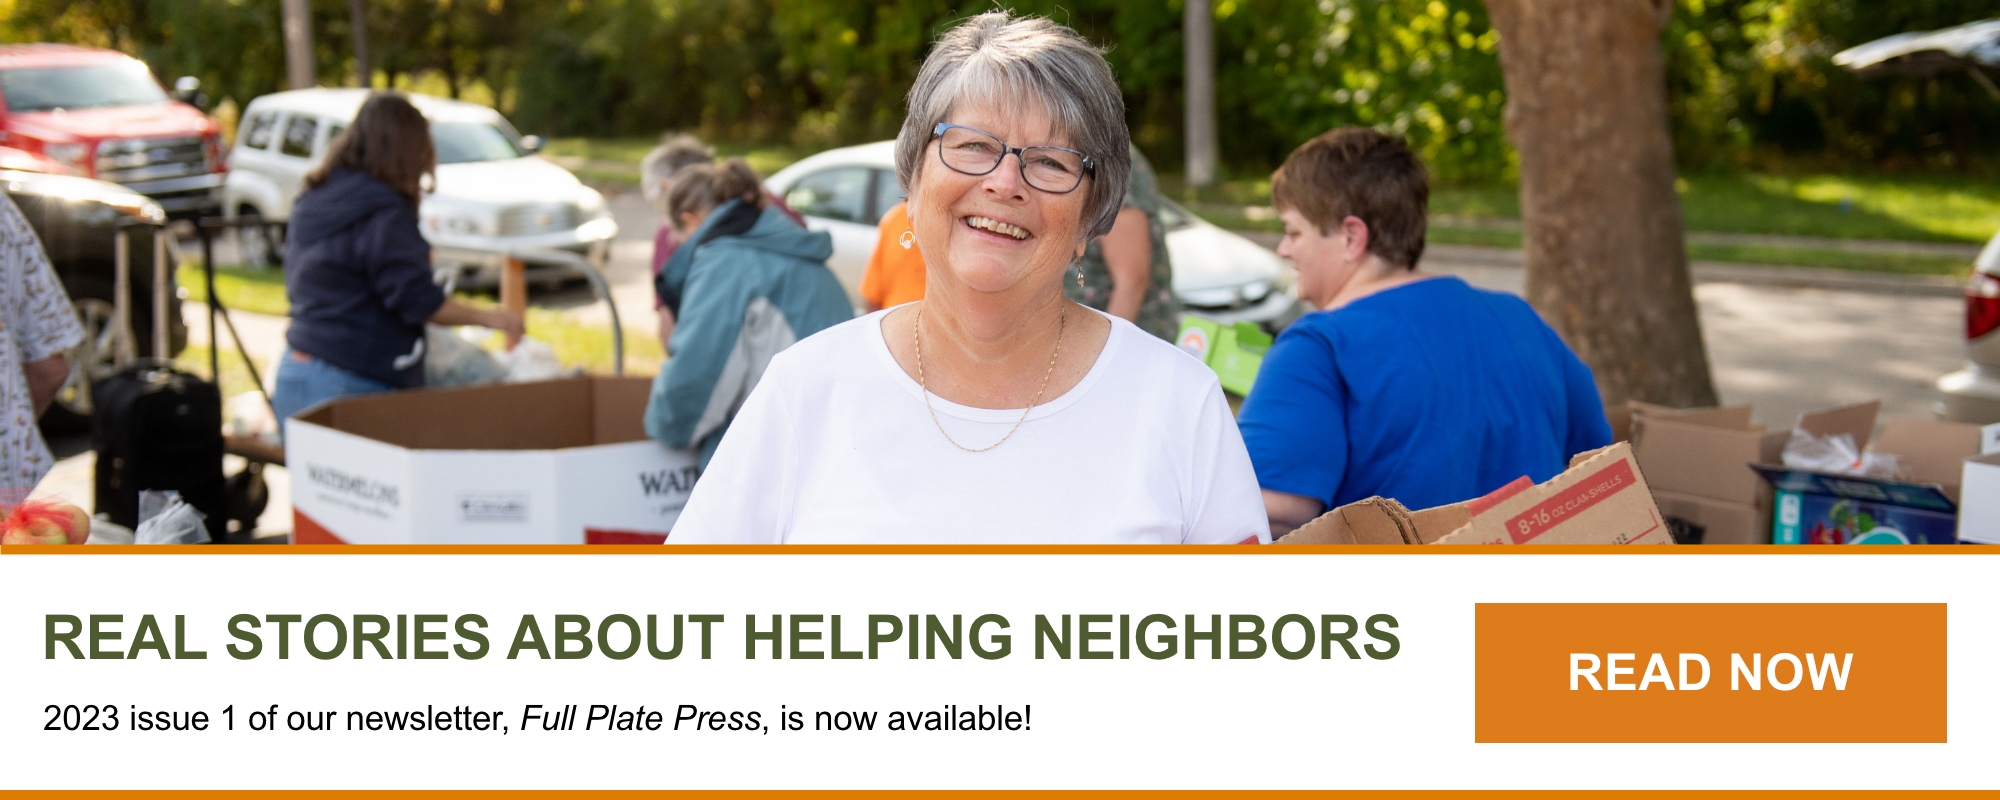 REAL STORIES ABOUT HELPING NEIGHBORS